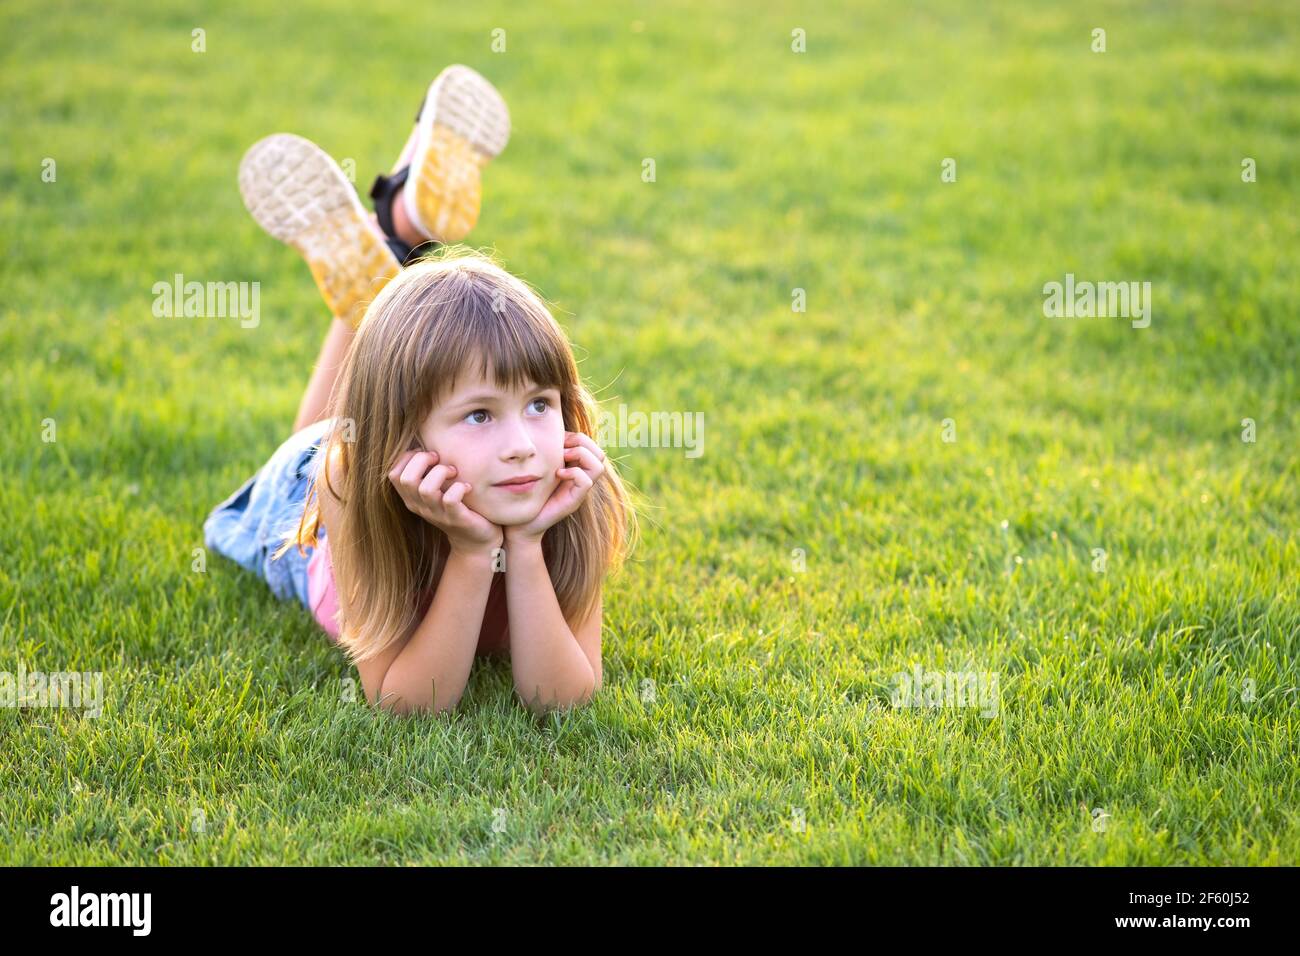 Little Girl Lying beside the Pool Stock Image - Image of nature, games:  37466907